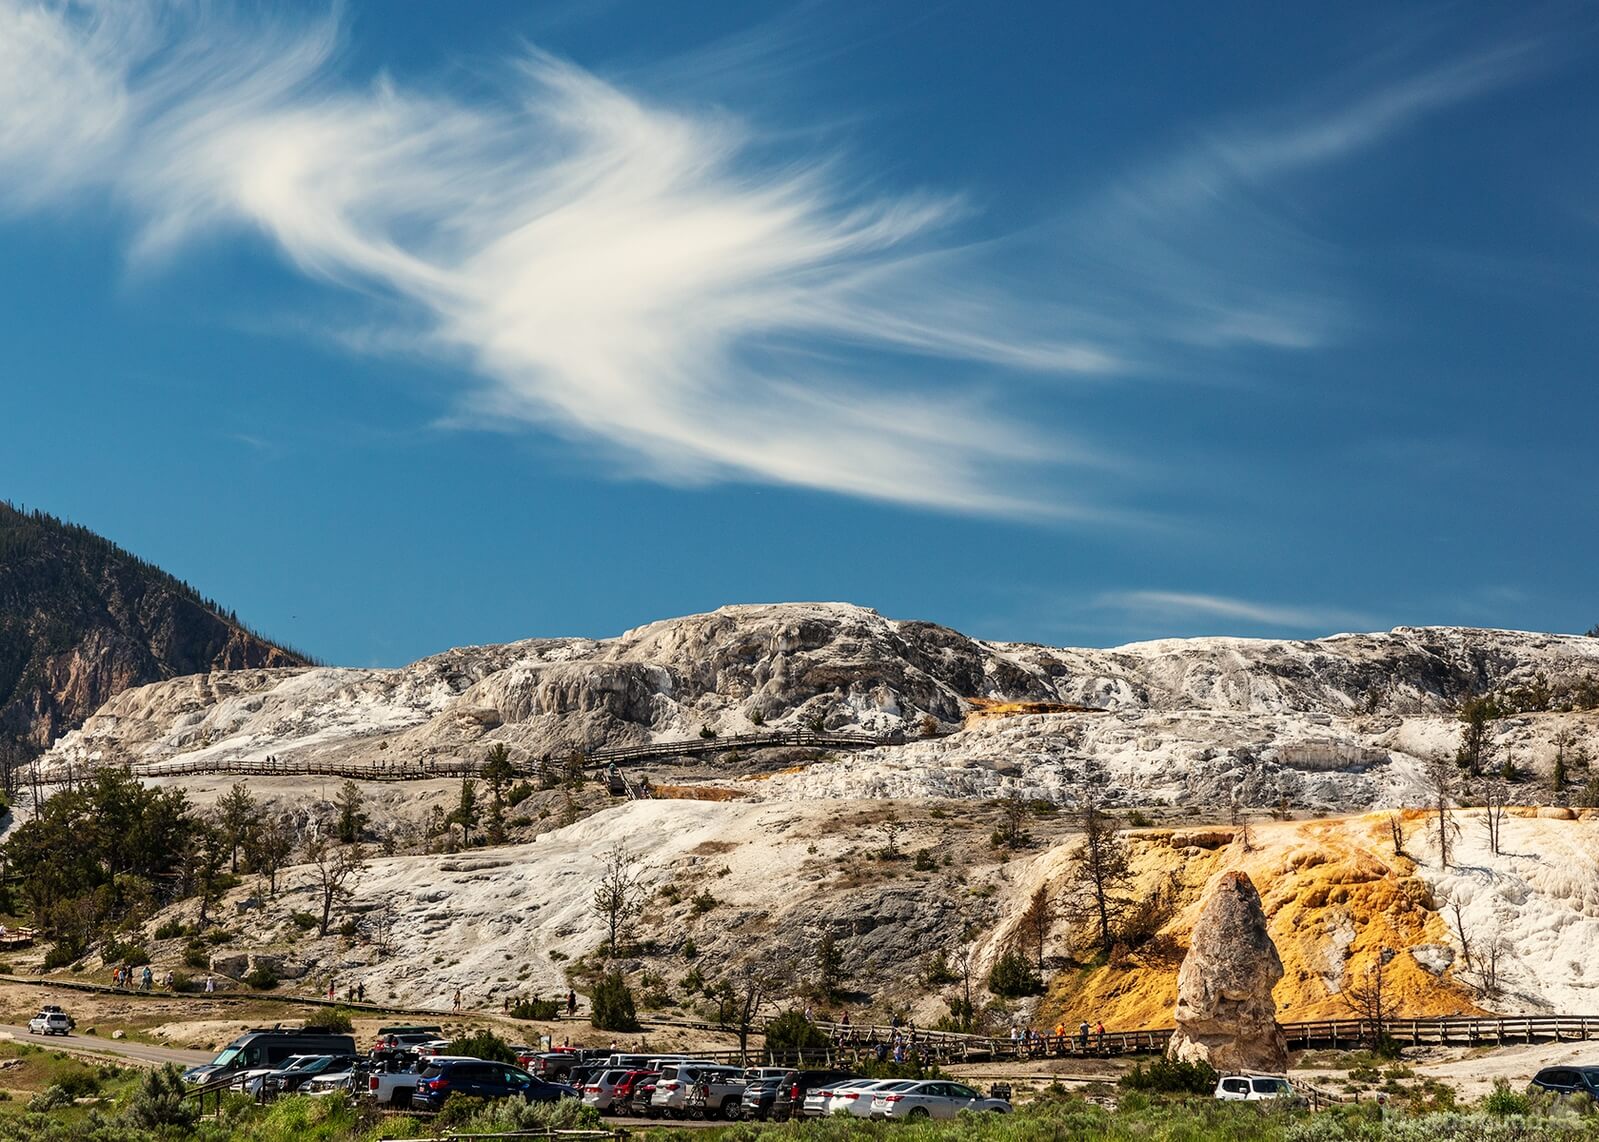 Image of Mammoth Hot Springs (MHS) General by Susan Budge